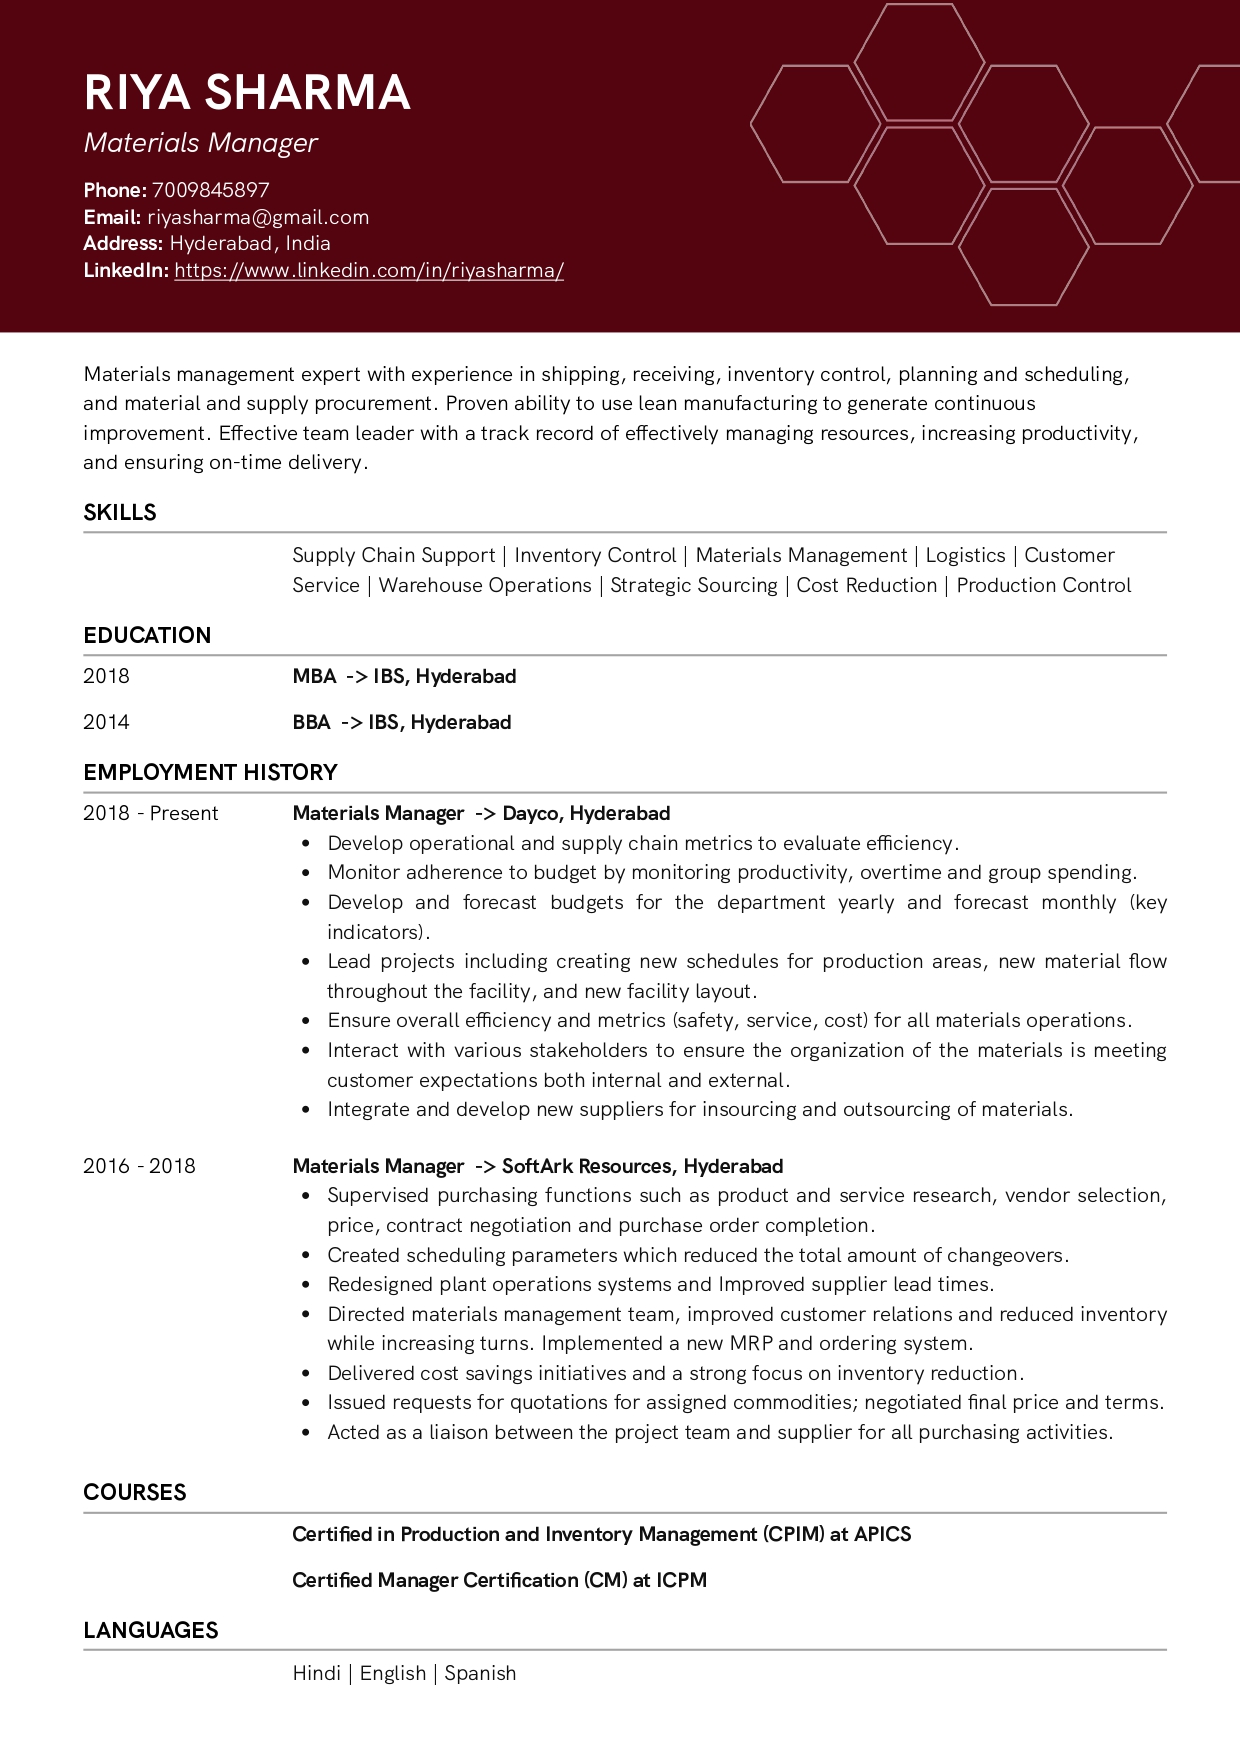 Resume of Materials Manager